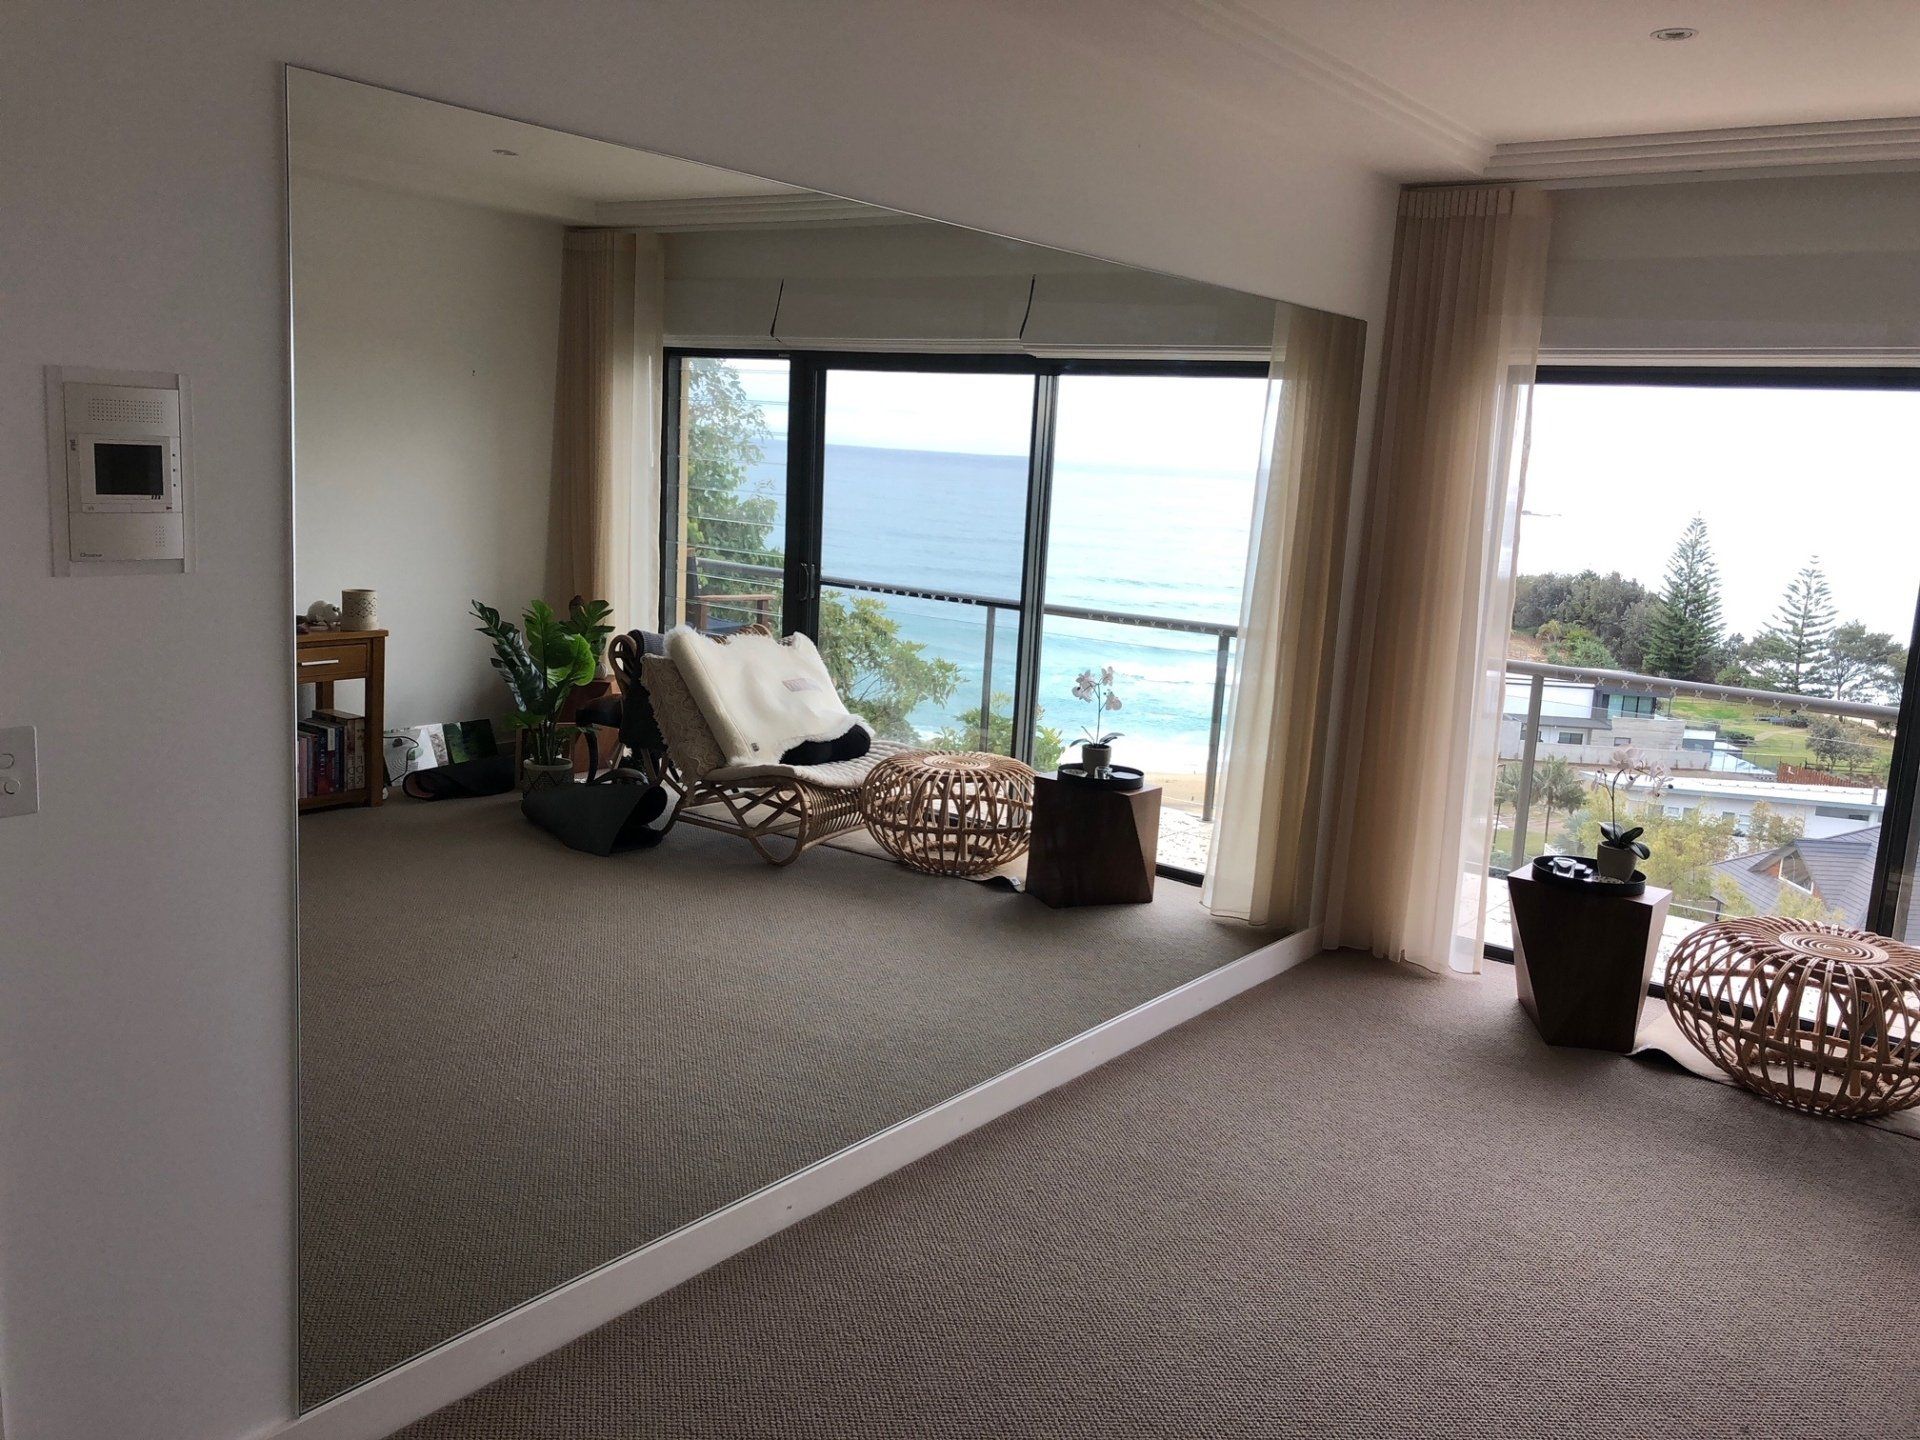 Large mirror in bedroom — Window Glass Repair and Installation in Coffs Harbour, NSW